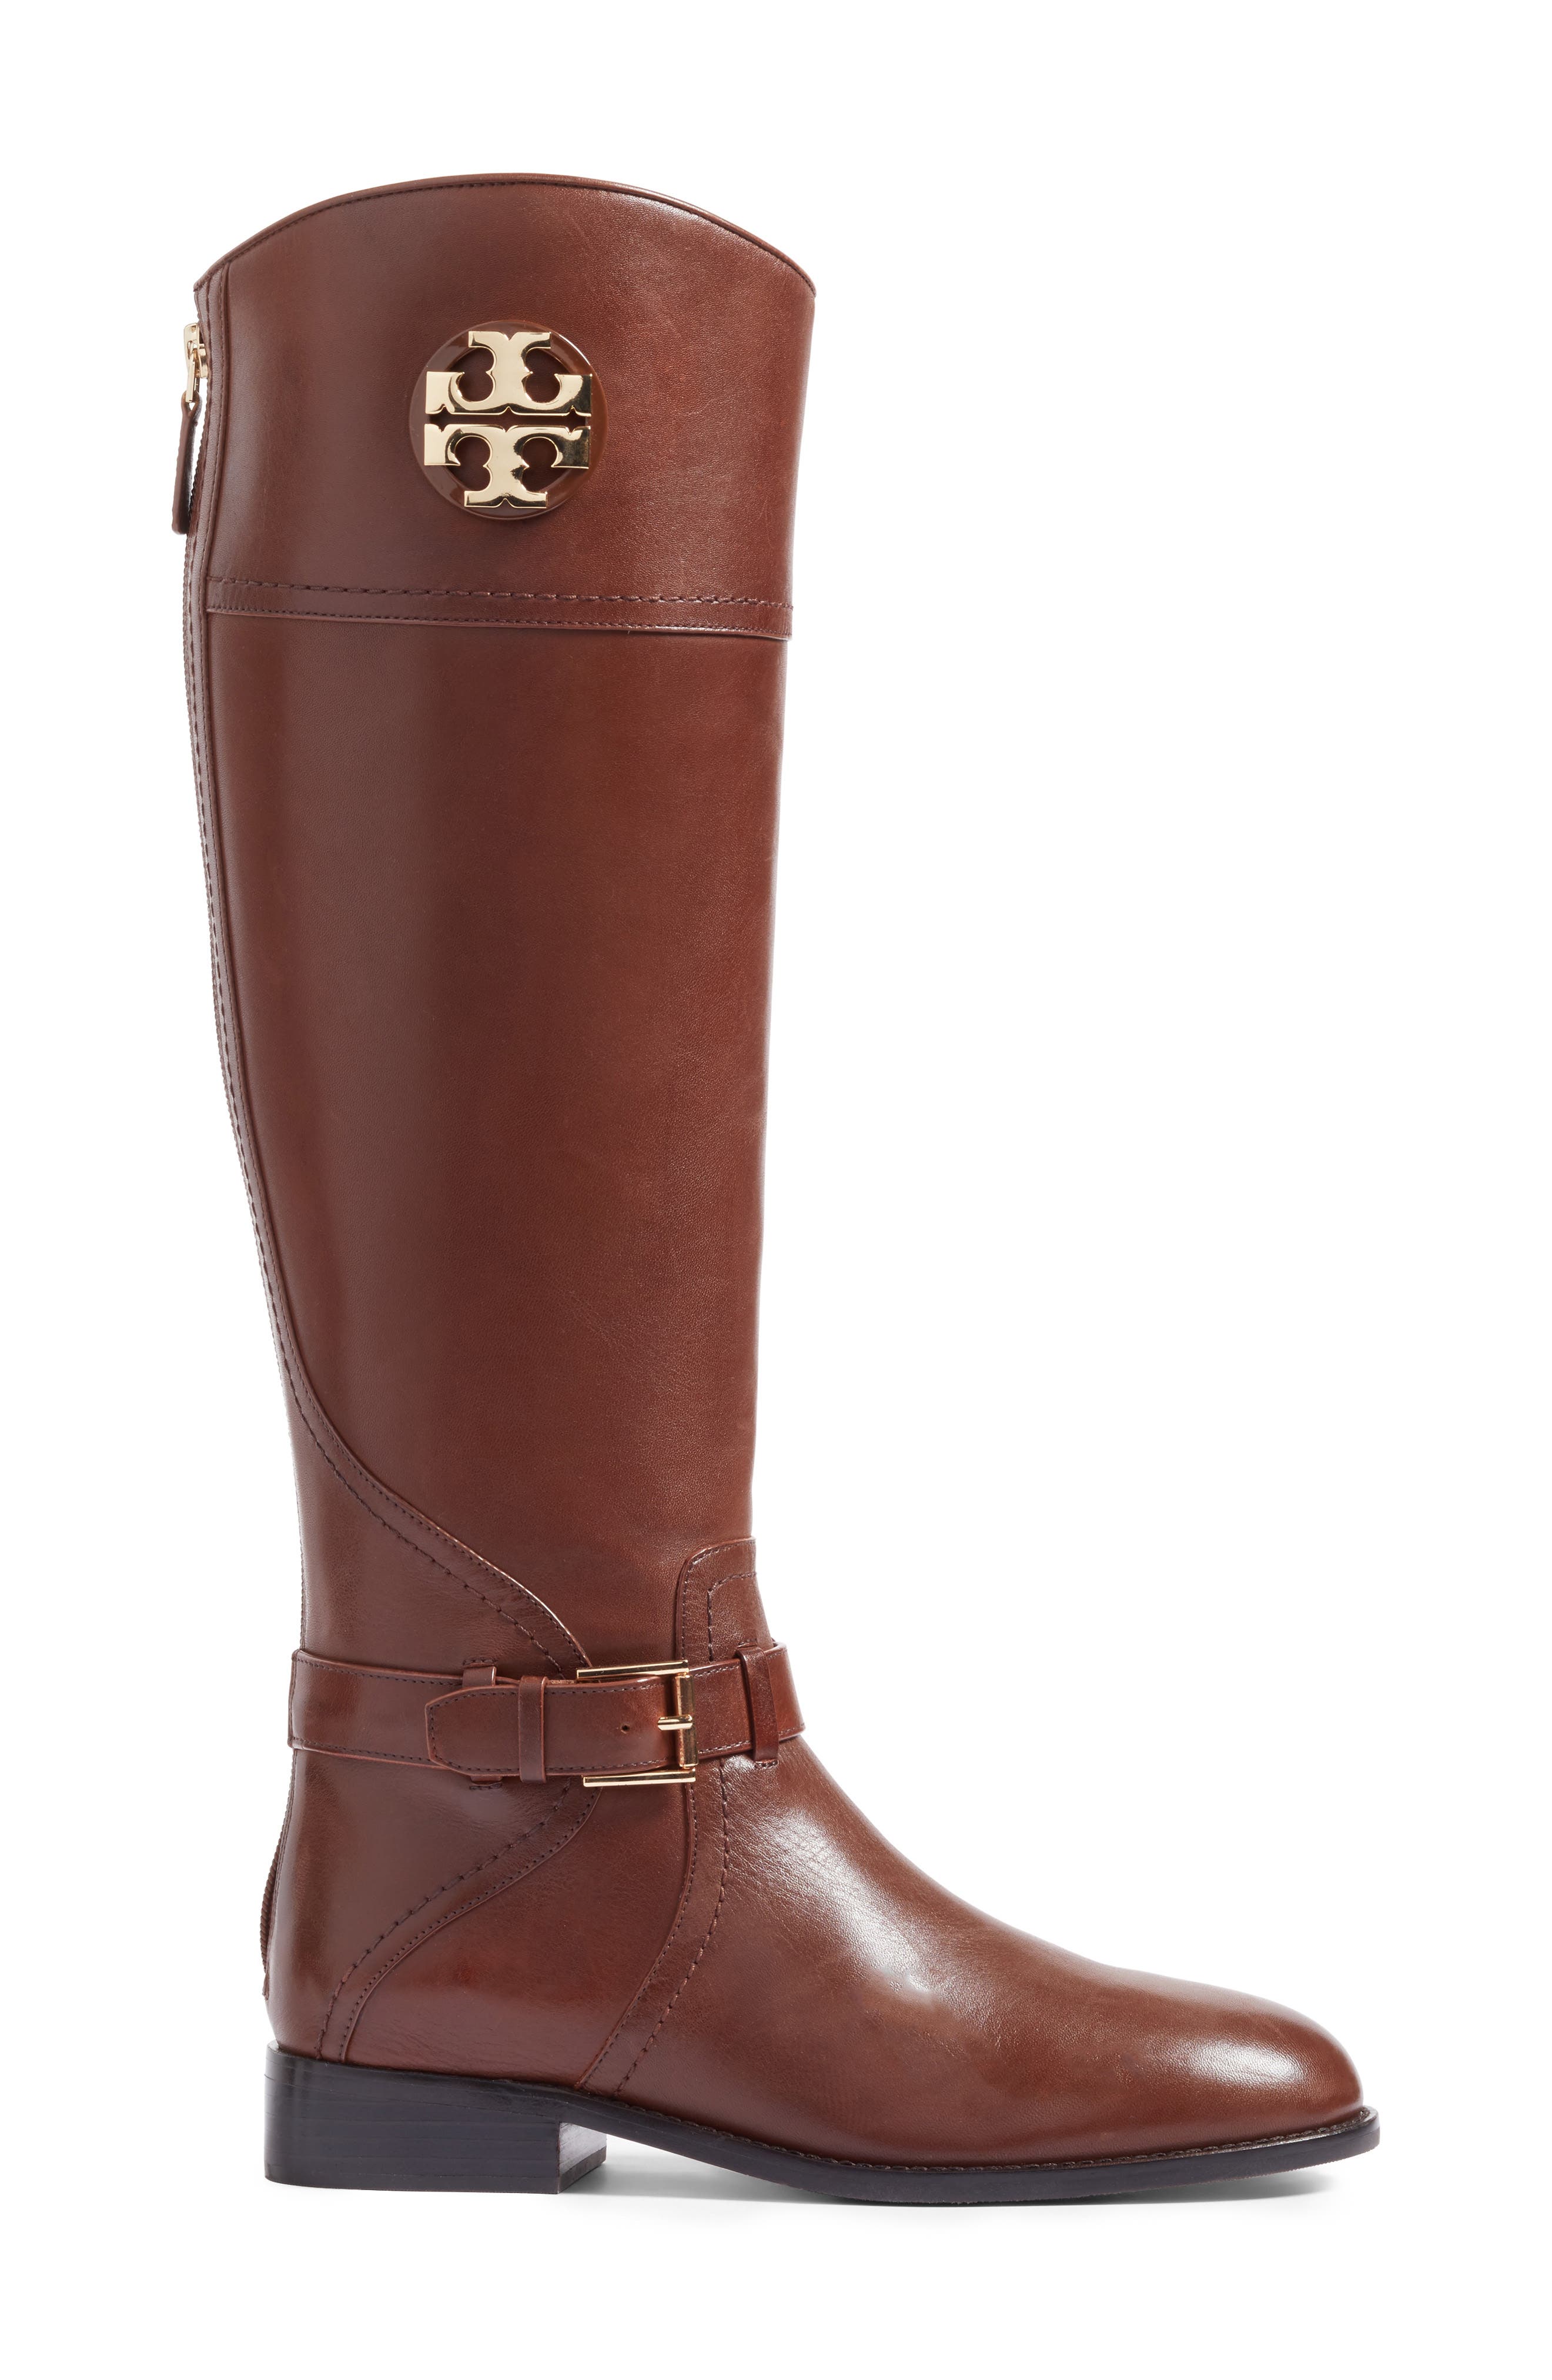 Tory Burch | Adeline Leather Riding Boot | Nordstrom Rack